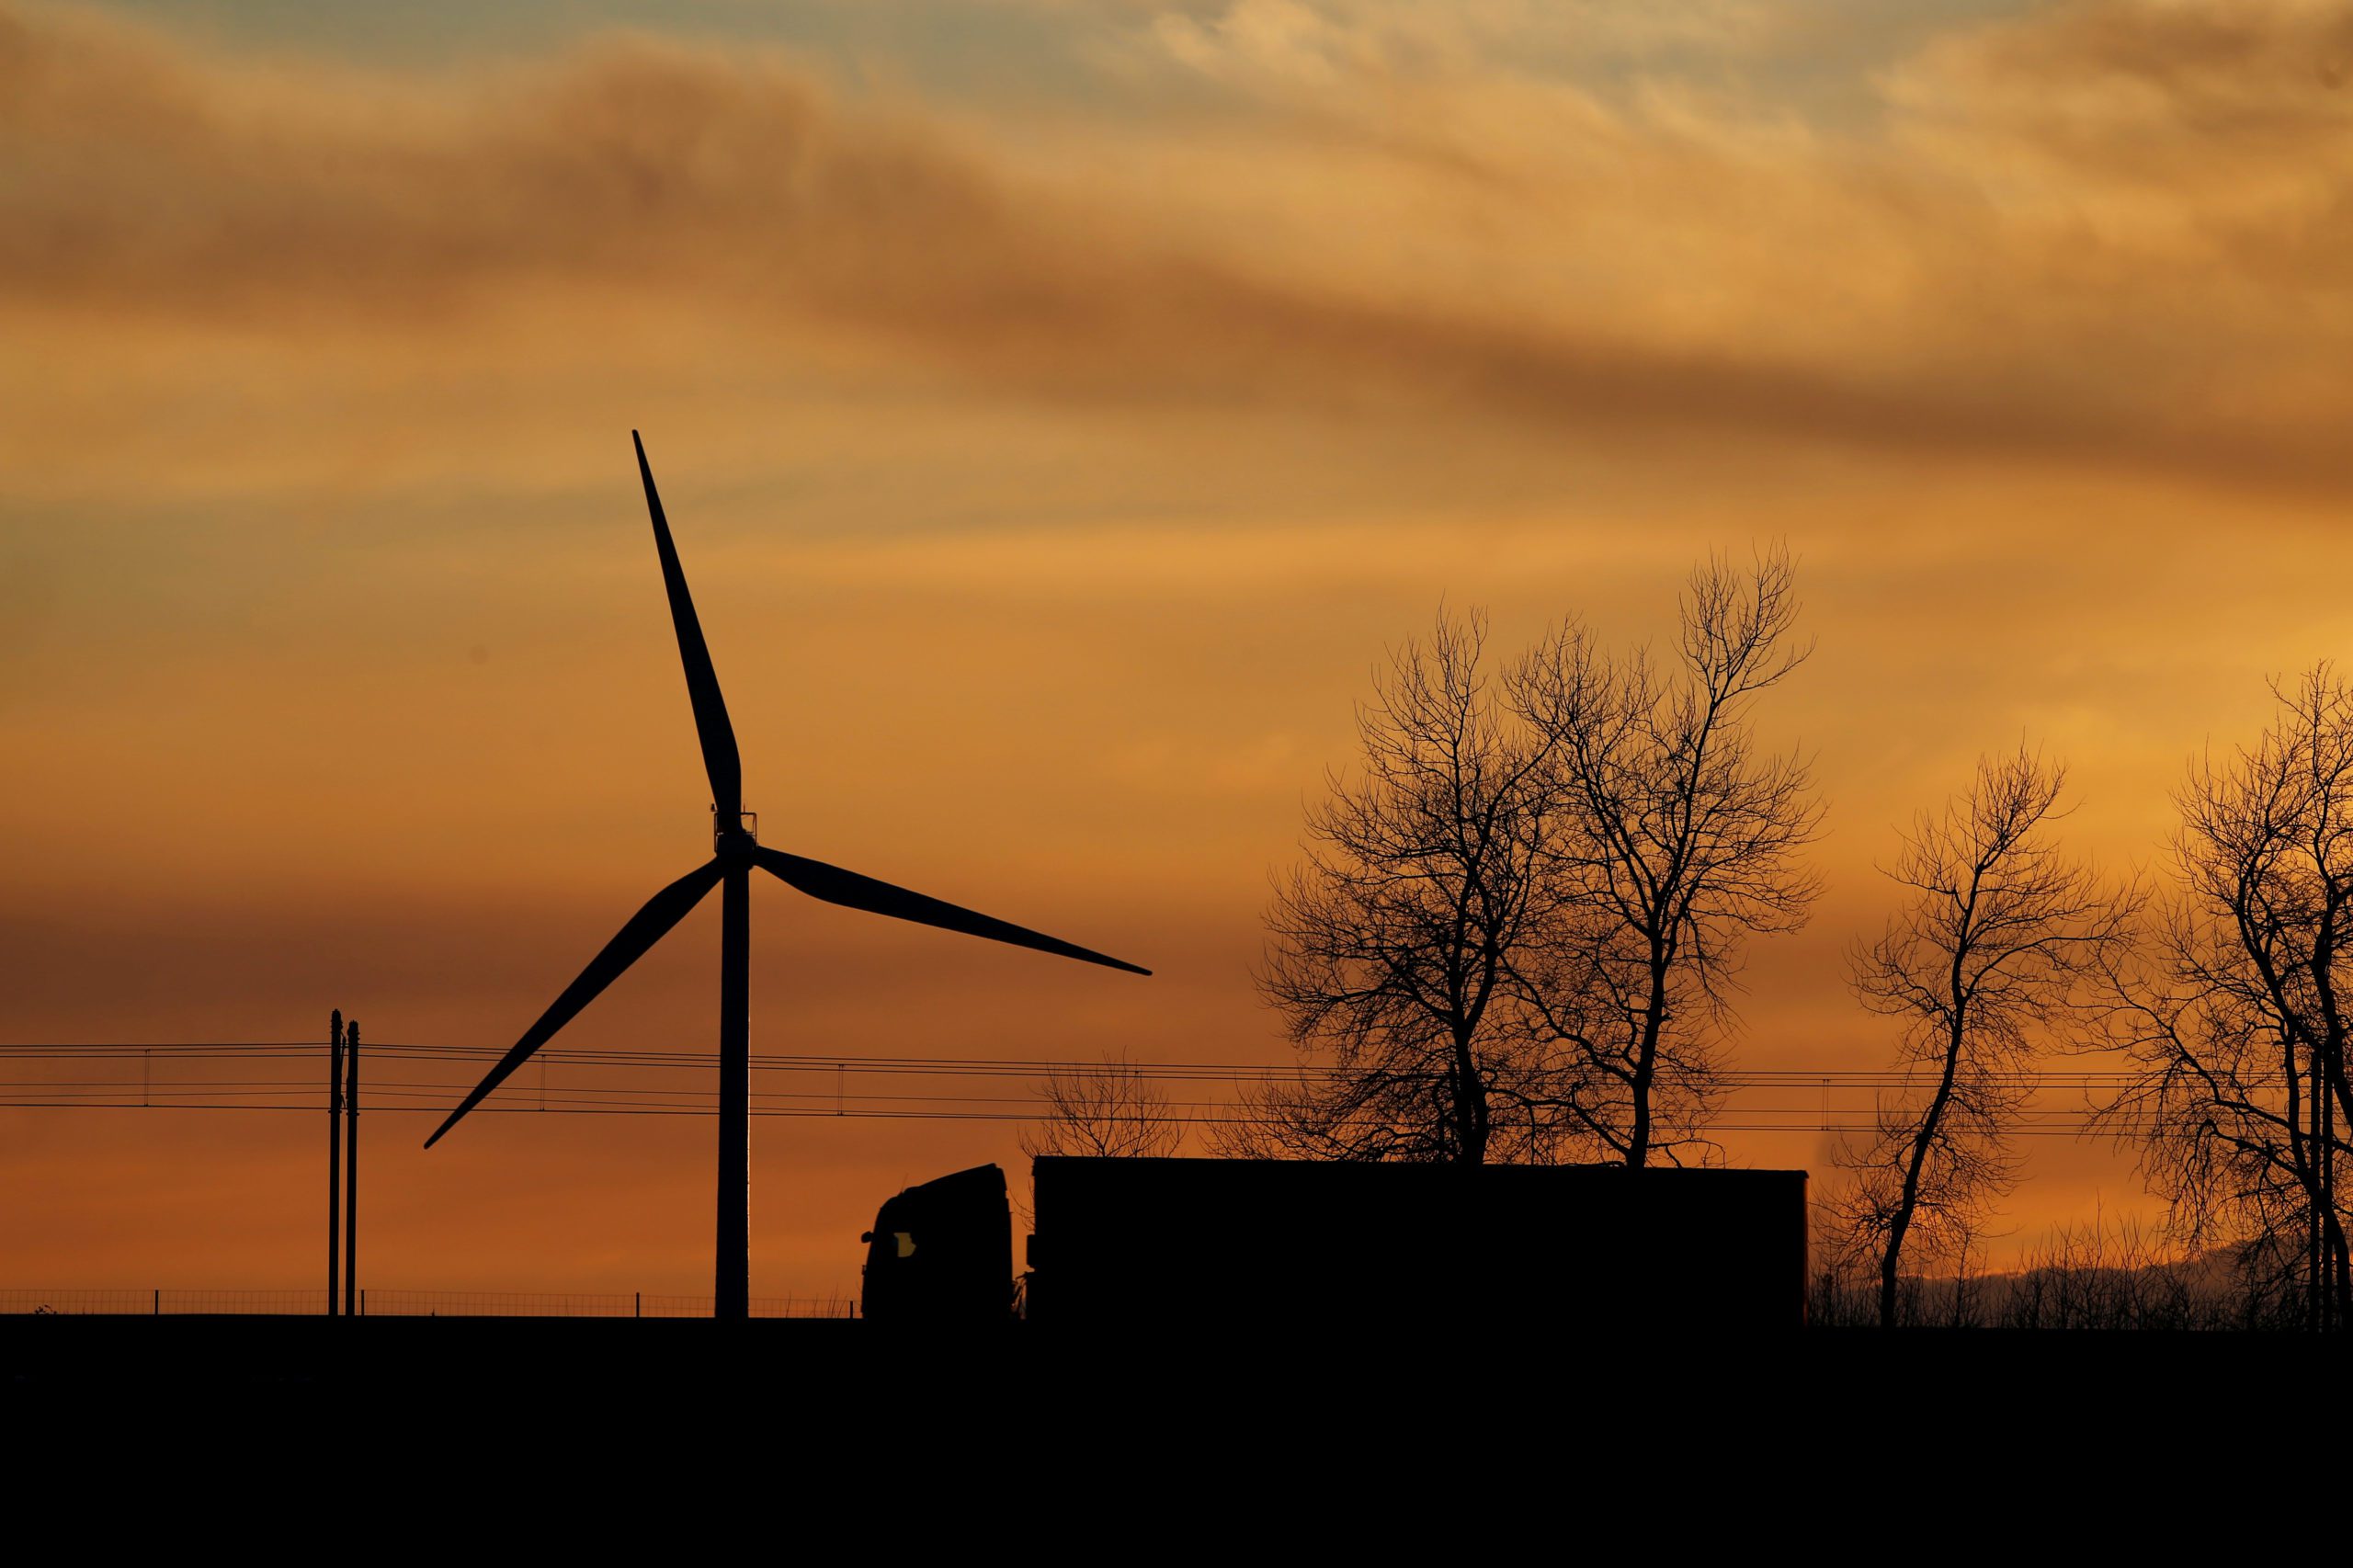 A truck drives in front of a power-generating windmill turbine on the Paris-Lille highway during sunset in Wancourt, France, April 3, 2019. REUTERS/Pascal Rossignol - RC1D3F655480